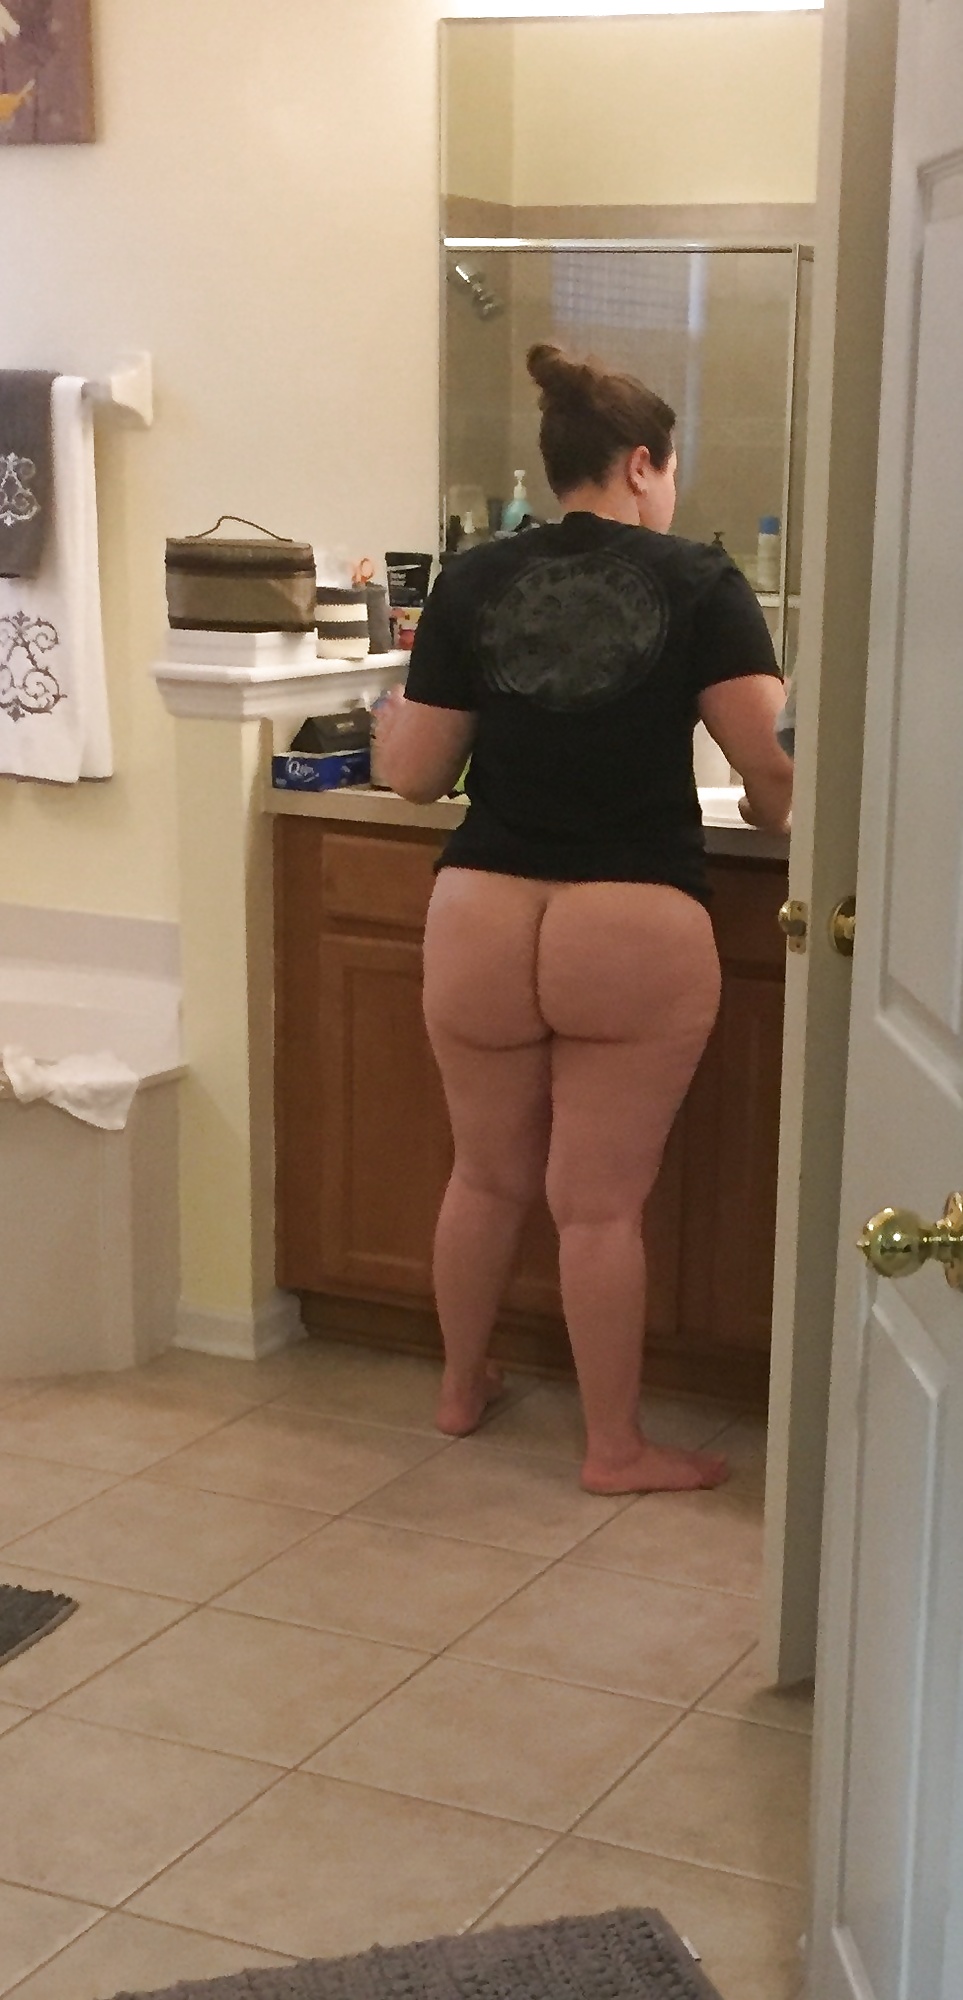 My Wife's Fat Piggy Ass and Cunt Exposed (23/23)